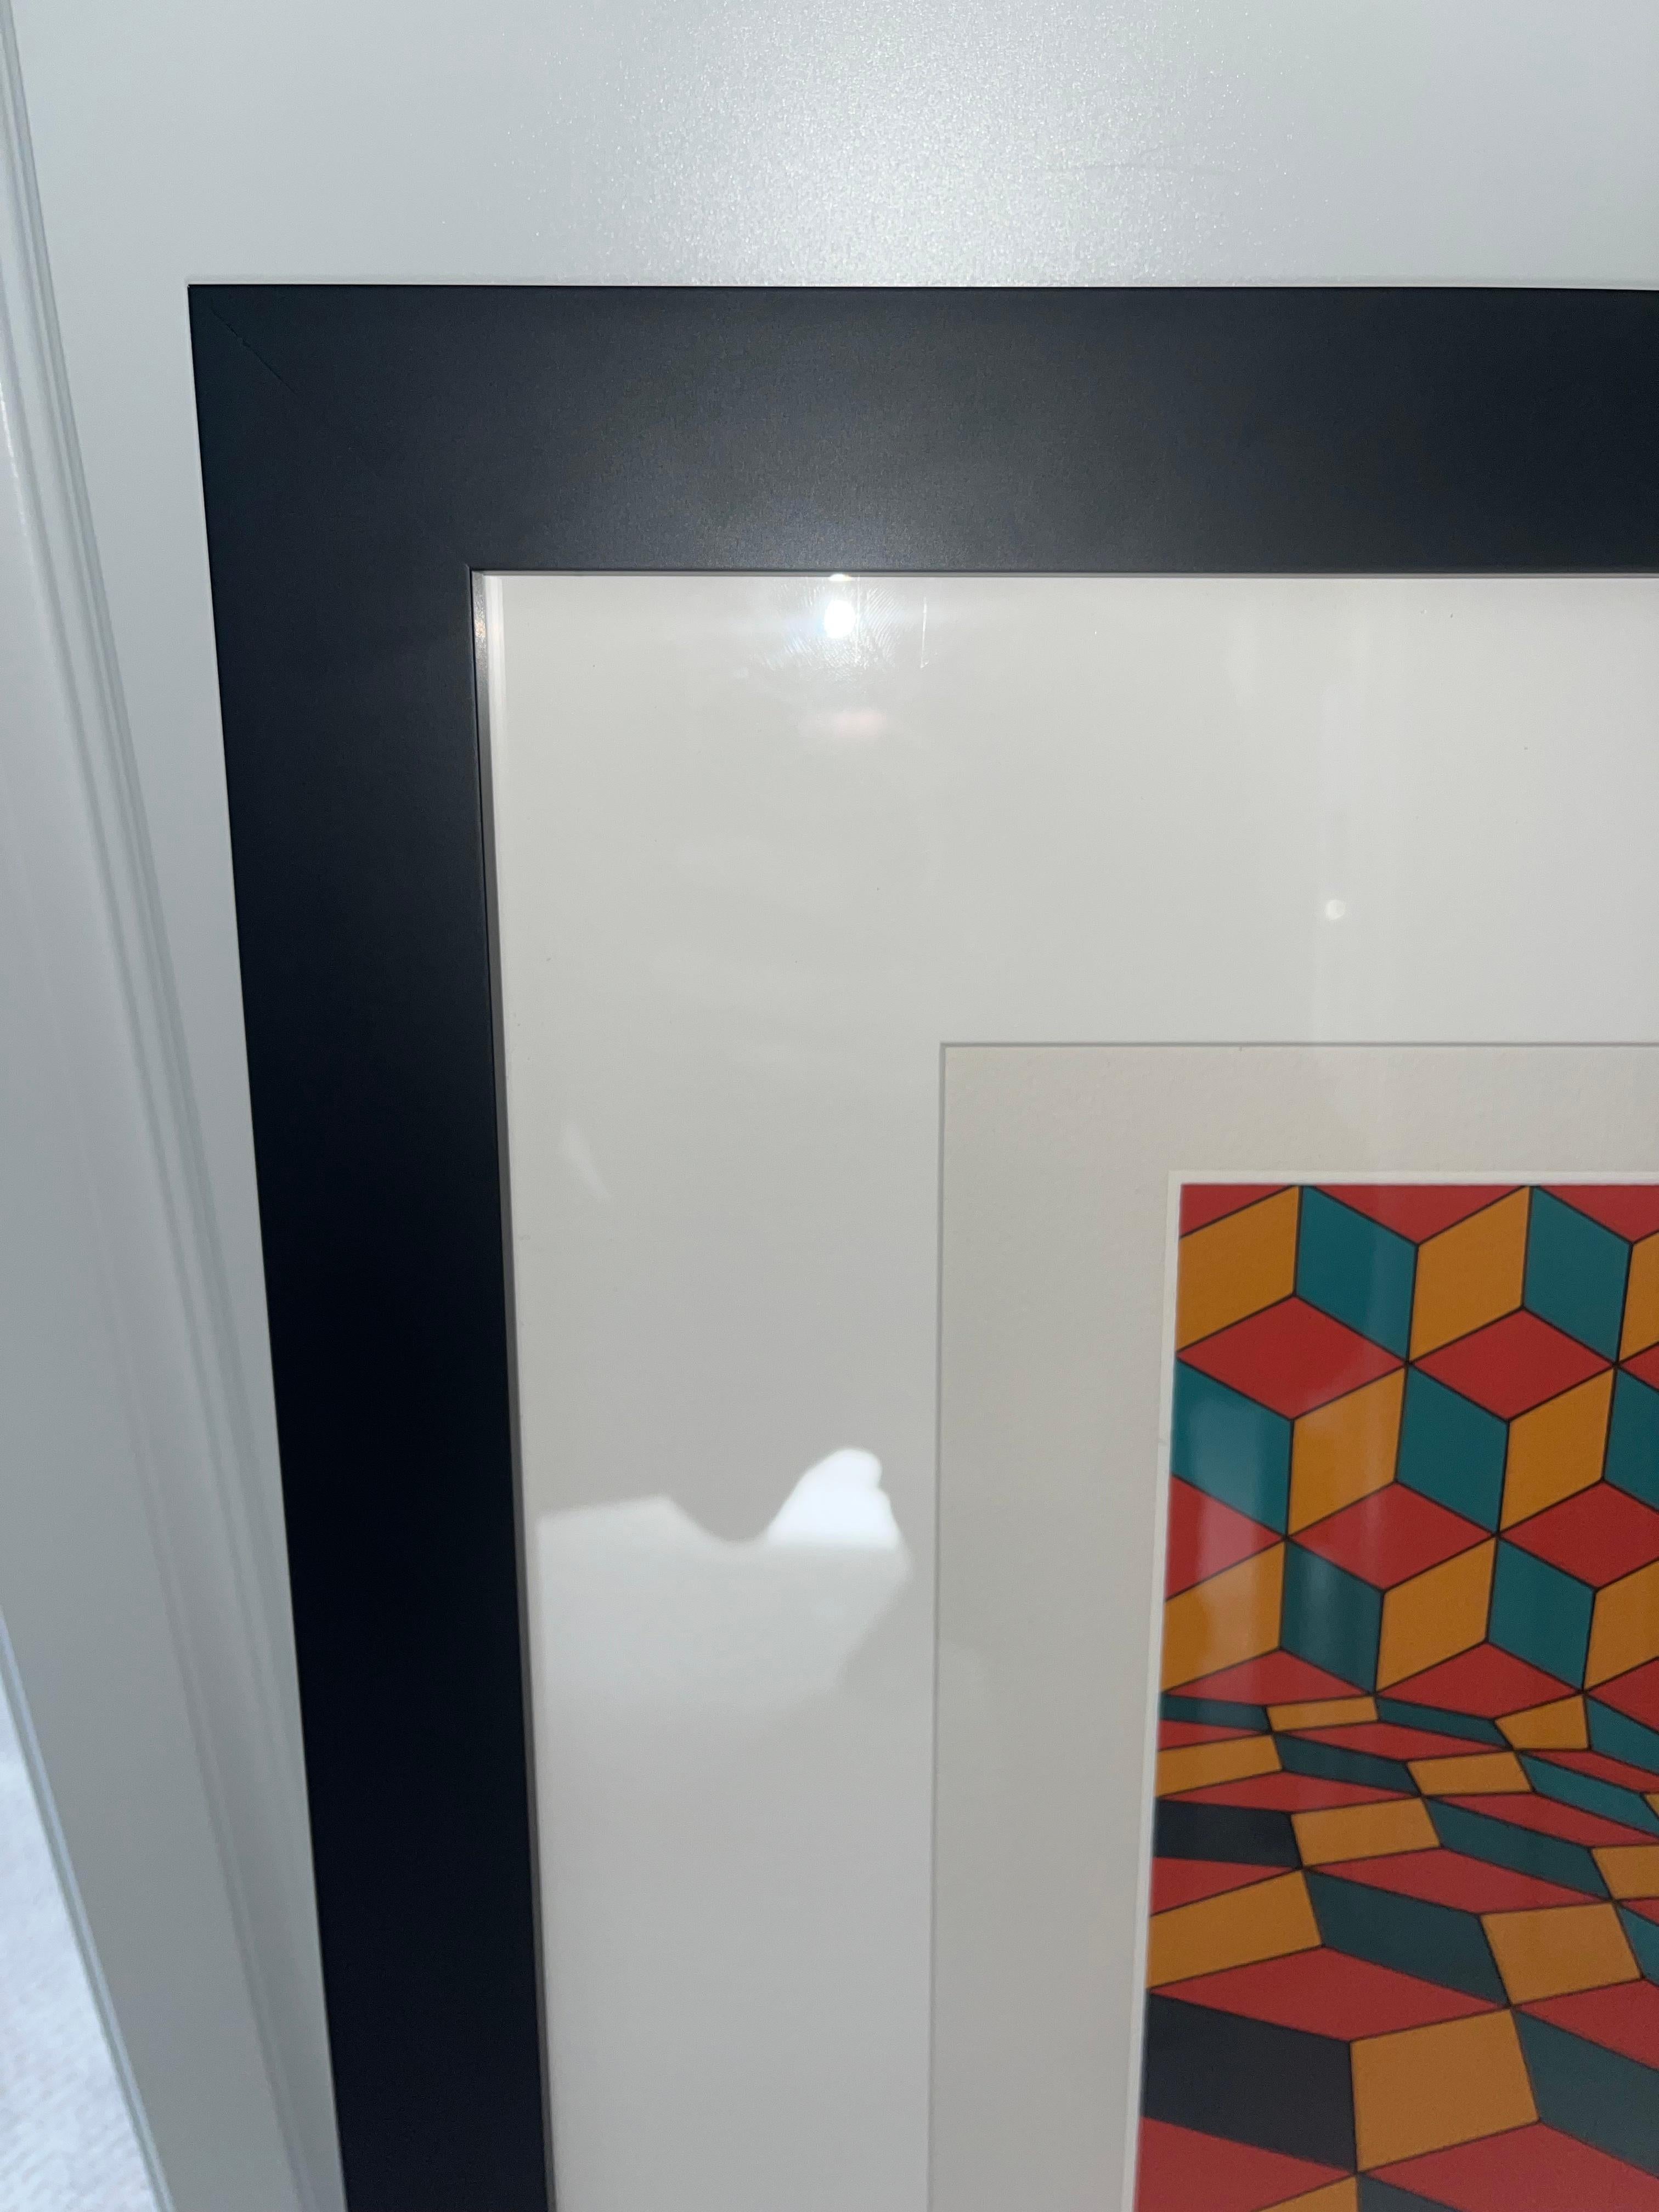                                                   Victor Vasarely                               
(1906 – 1997)
    Composition Cinétique

Serigraph in colors on wove paper, 1970
29 x 32-1/2 inches (73.7 x 82.6 cm) (sheet)
F.V. 56/60
Signed and